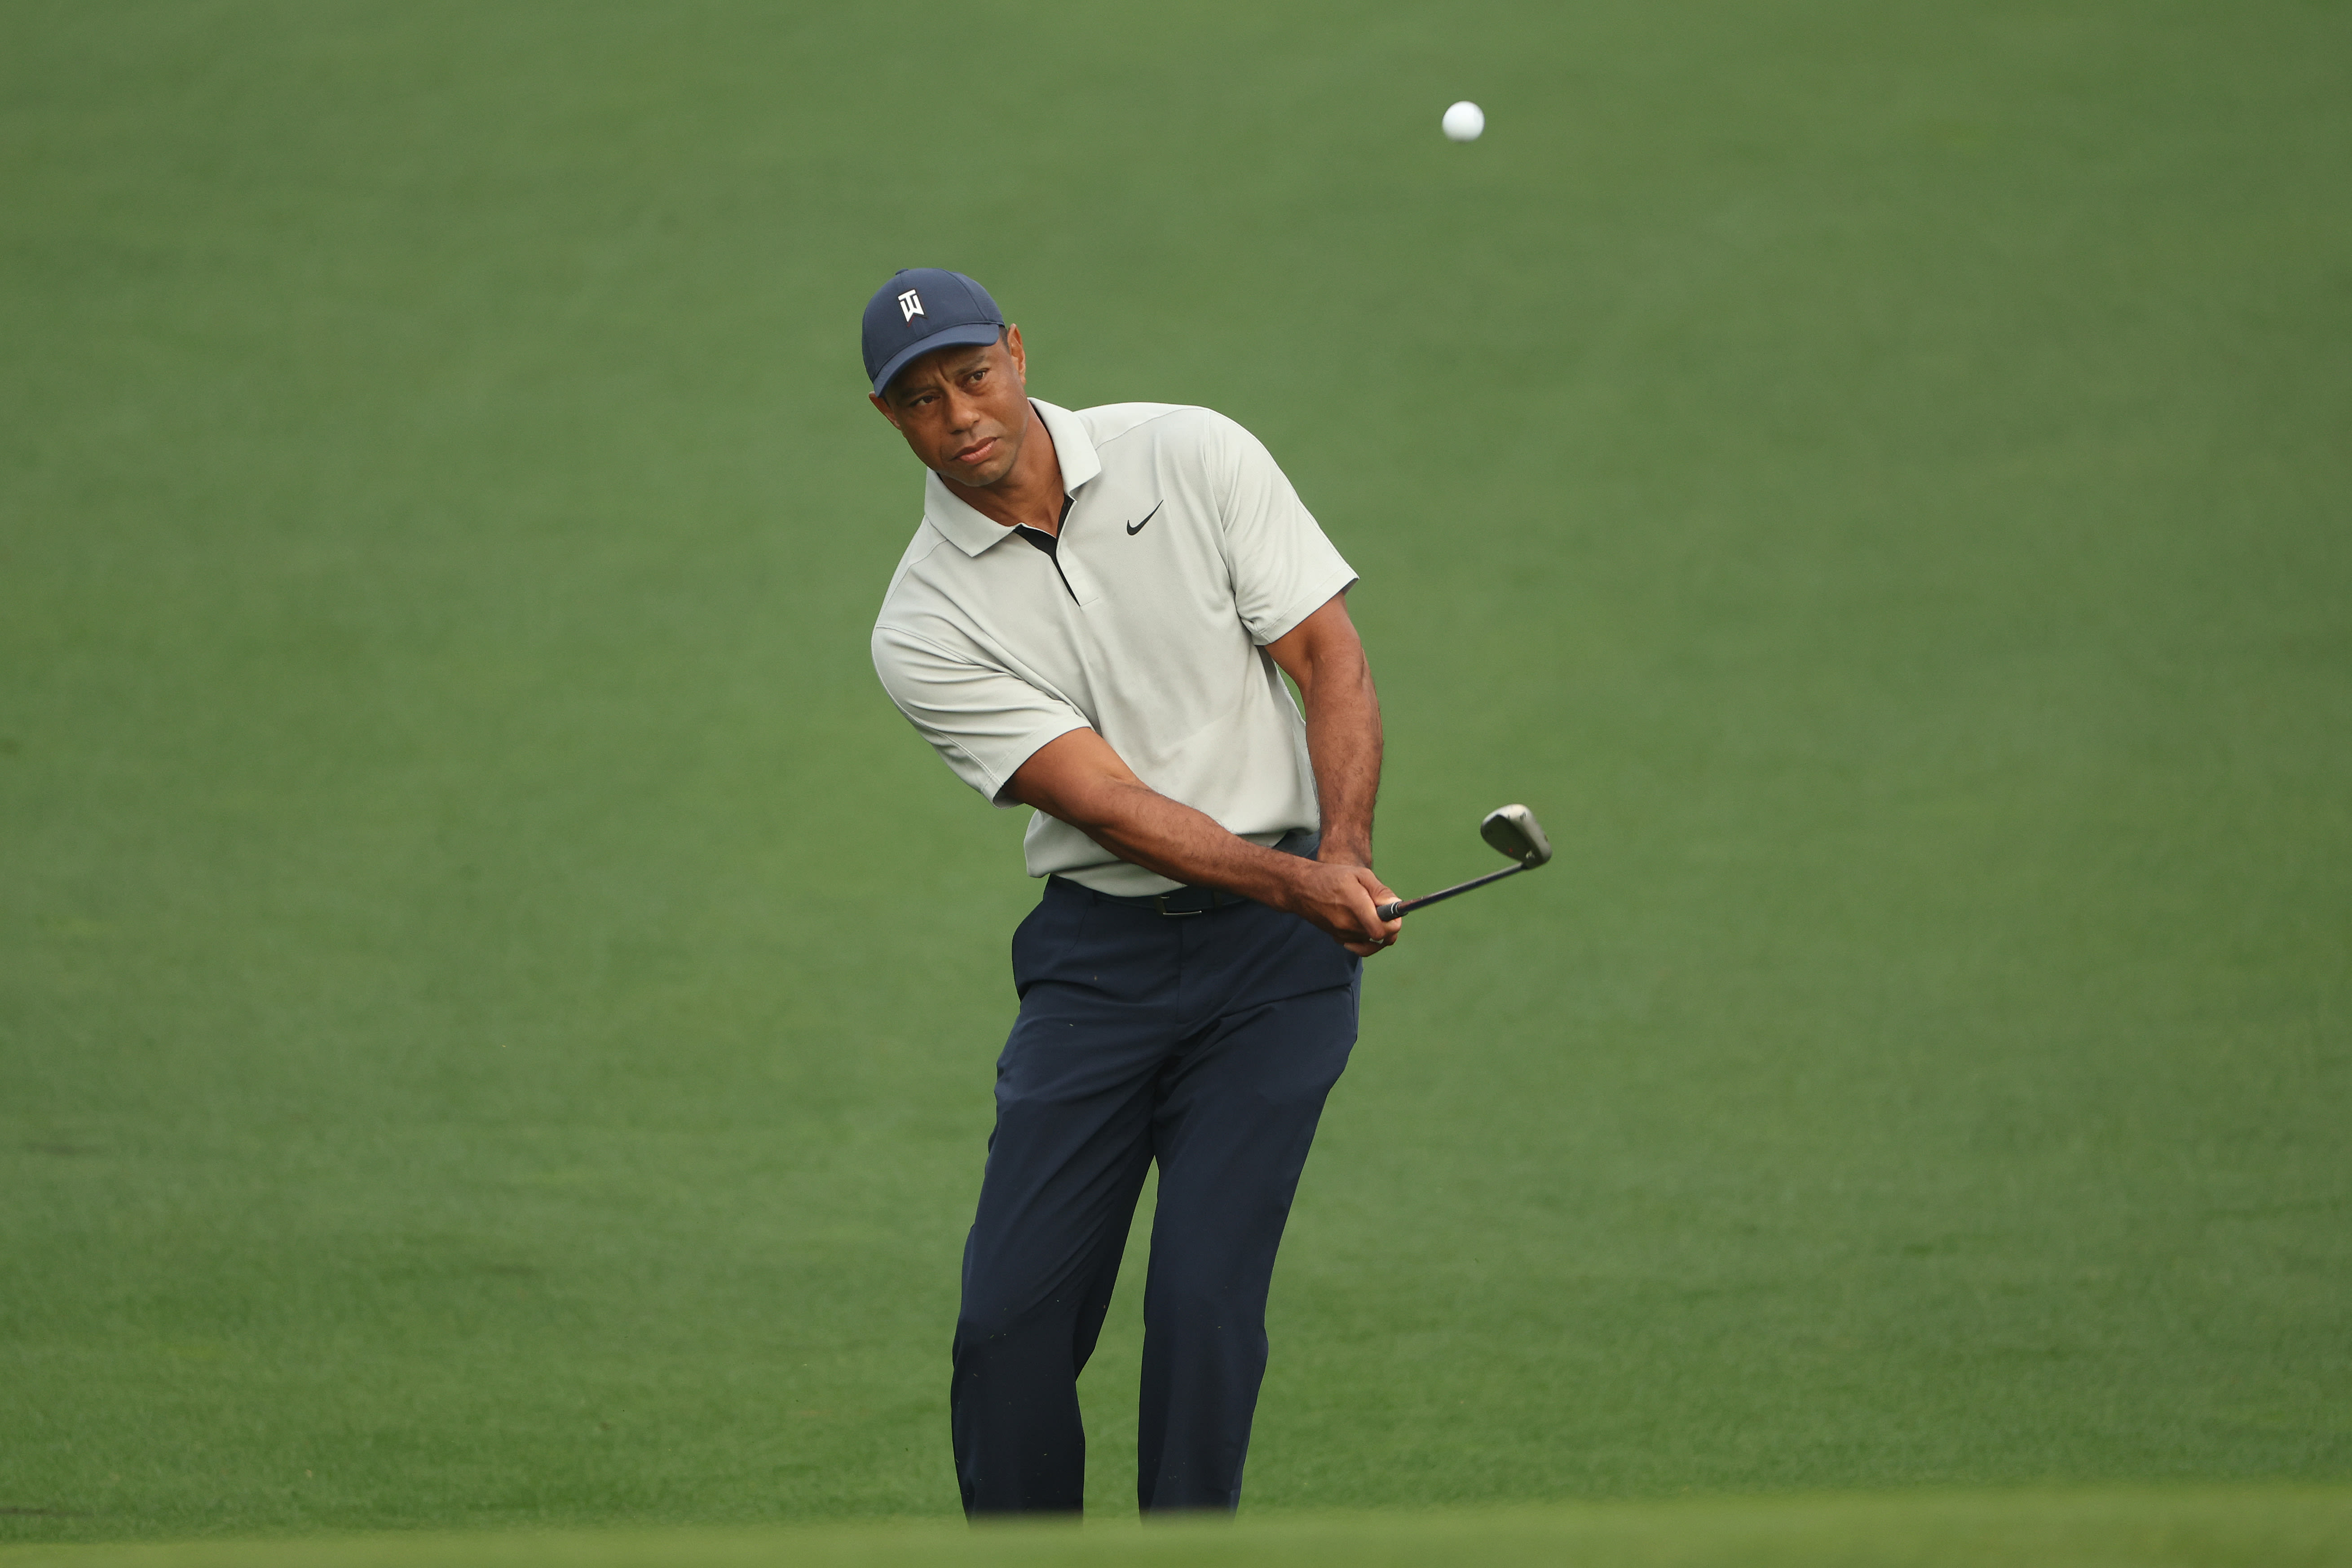 Tiger Woods during a practice round prior to the 2023 Masters Tournament. (Photo by Patrick Smith/Getty Images)